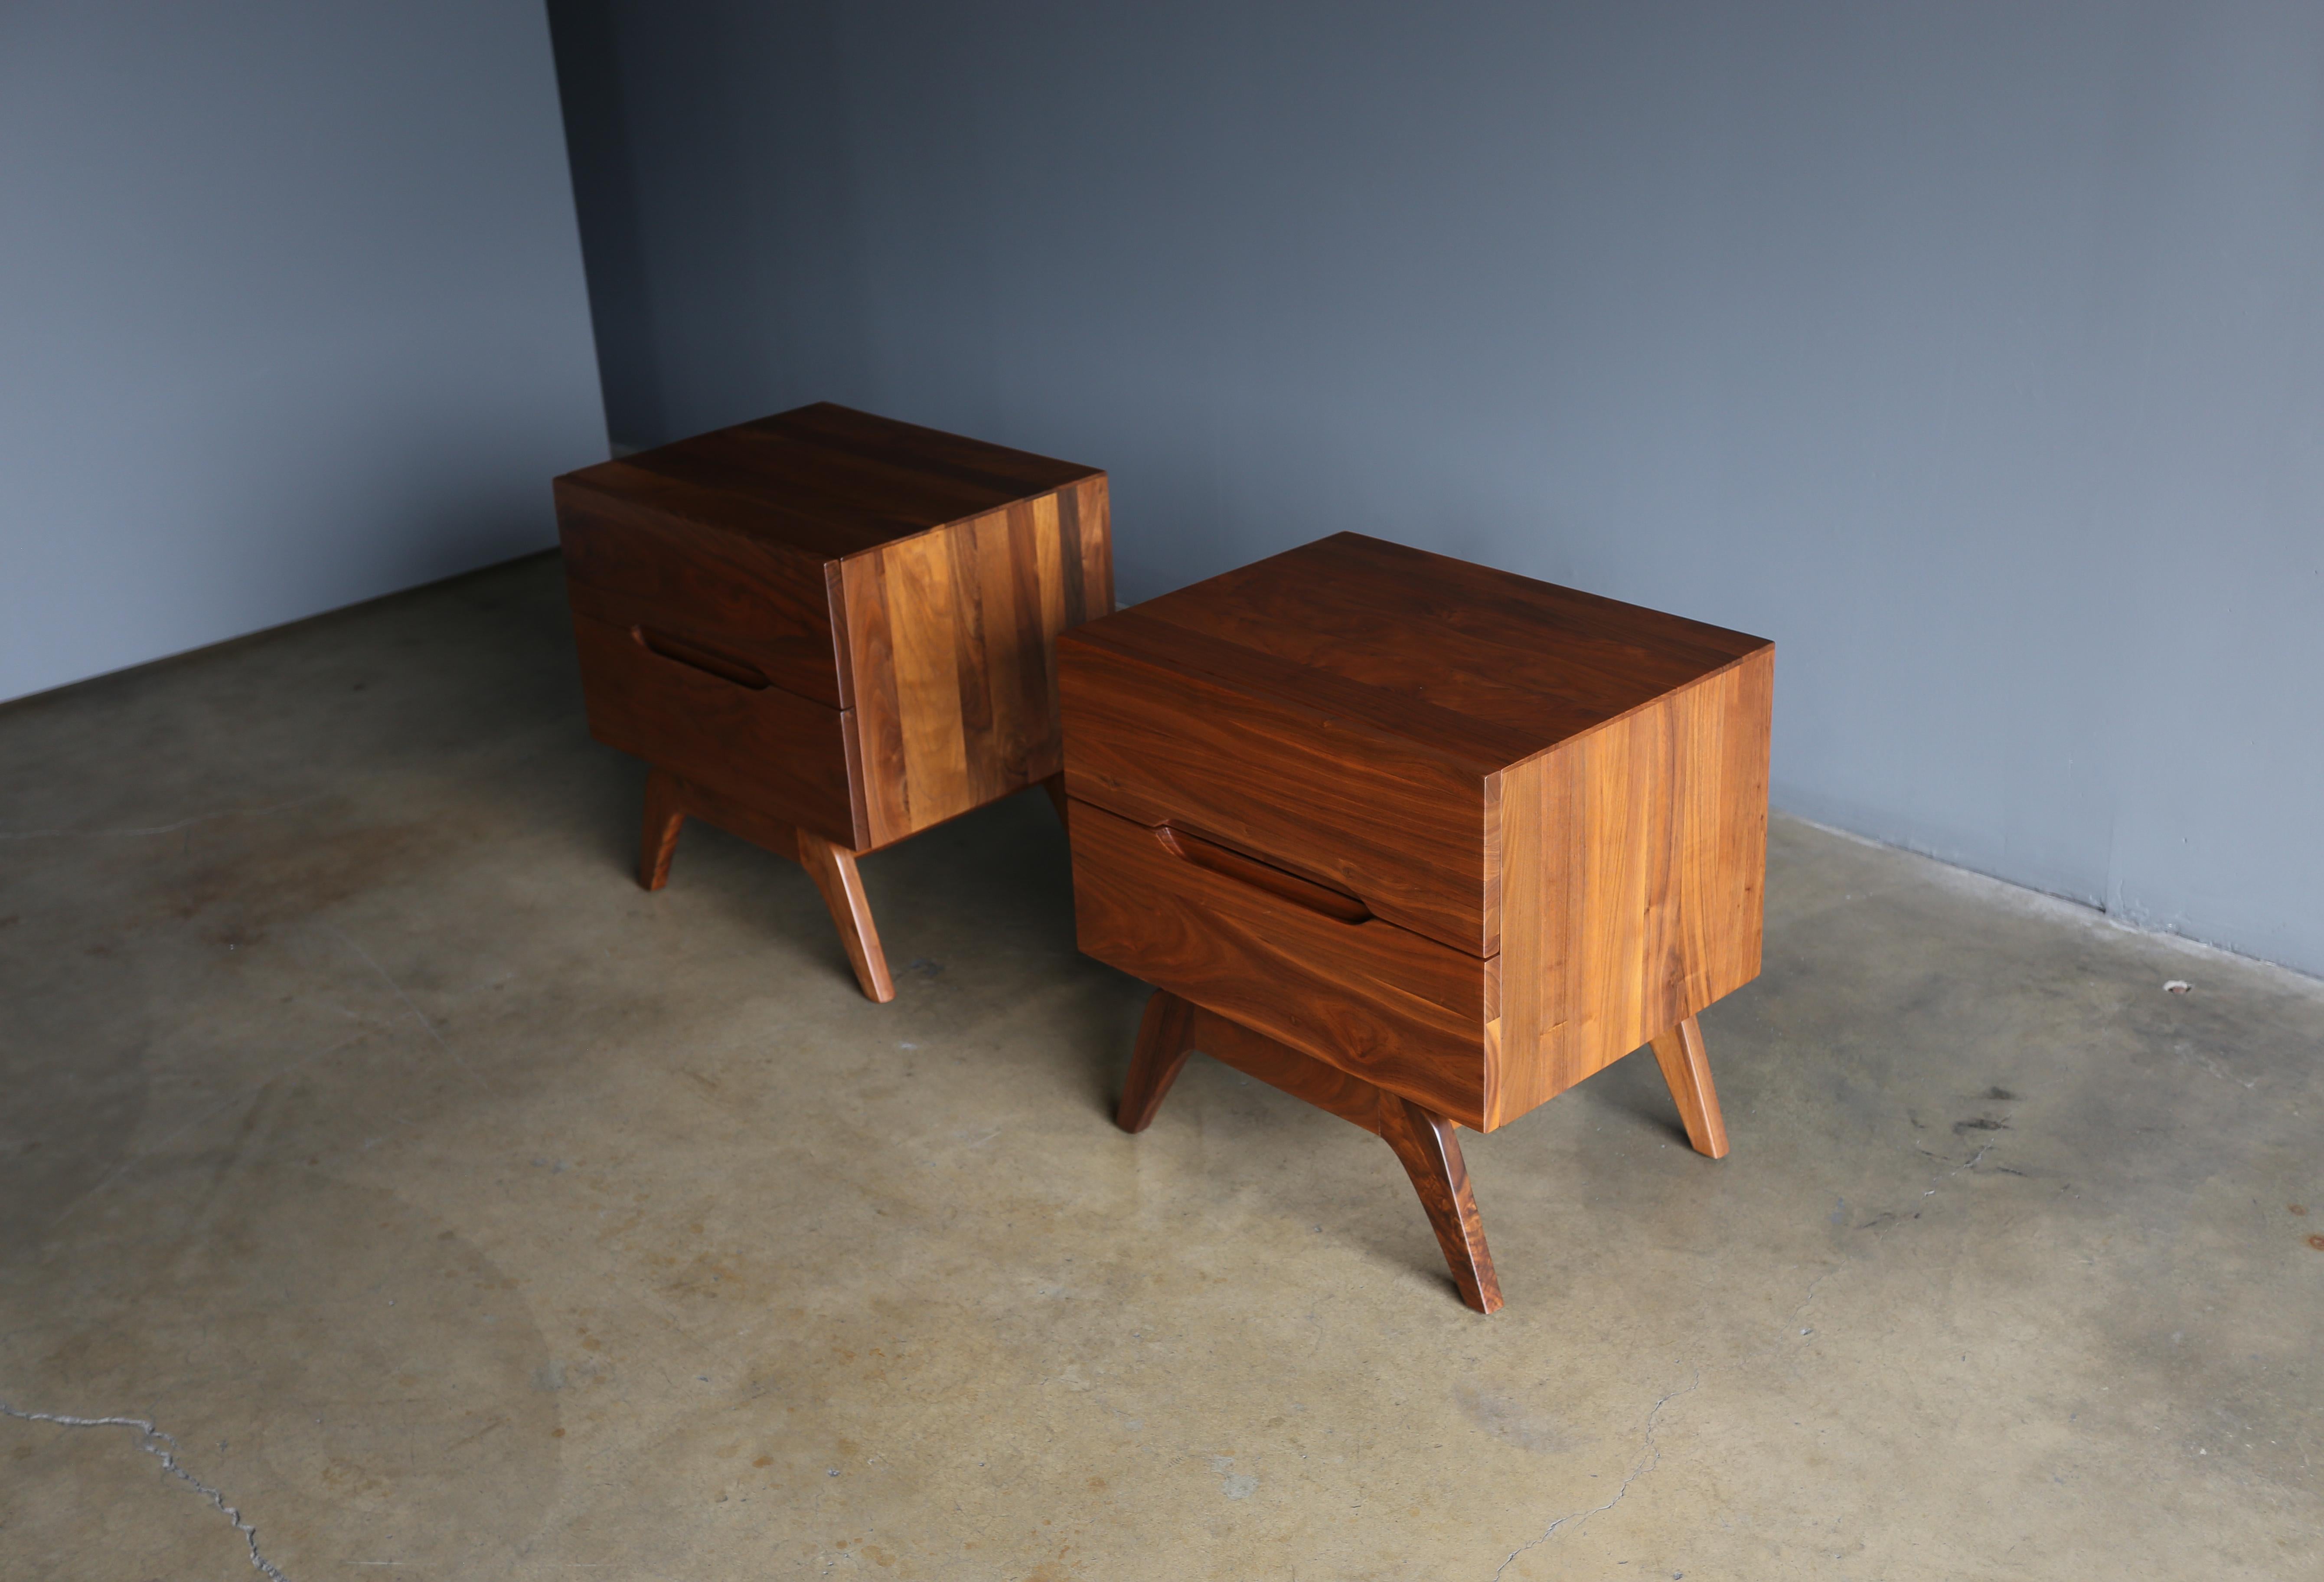 Sculptural solid walnut nightstands, circa 1965. This pair has been professionally restored.